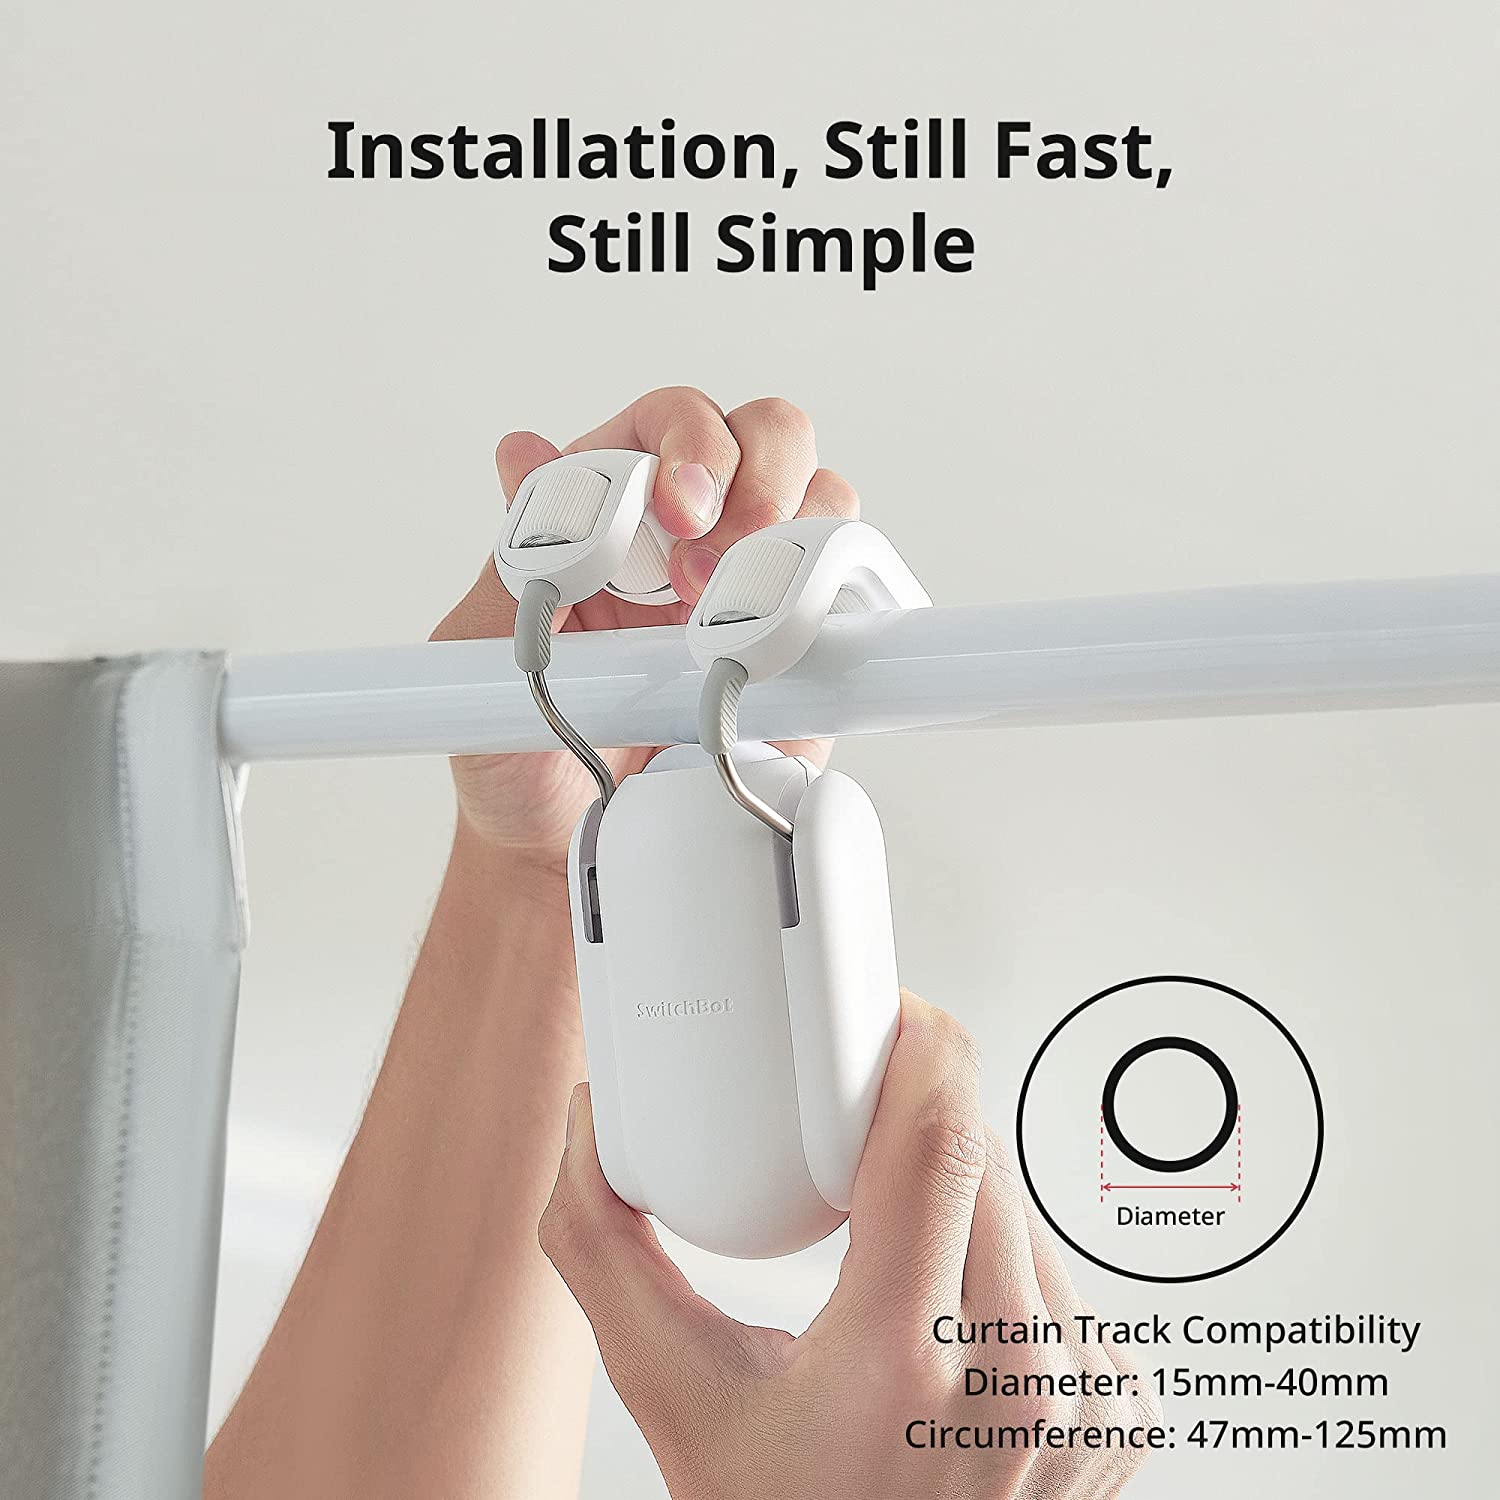 SwitchBot Curtain (Rod 2) with Hub Mini Bundle | Smart Electric Motor - Wireless App Automate Timer Control with SwitchBot Hub Mini to Make it Compatible with Alexa, Google Home, IFTTT